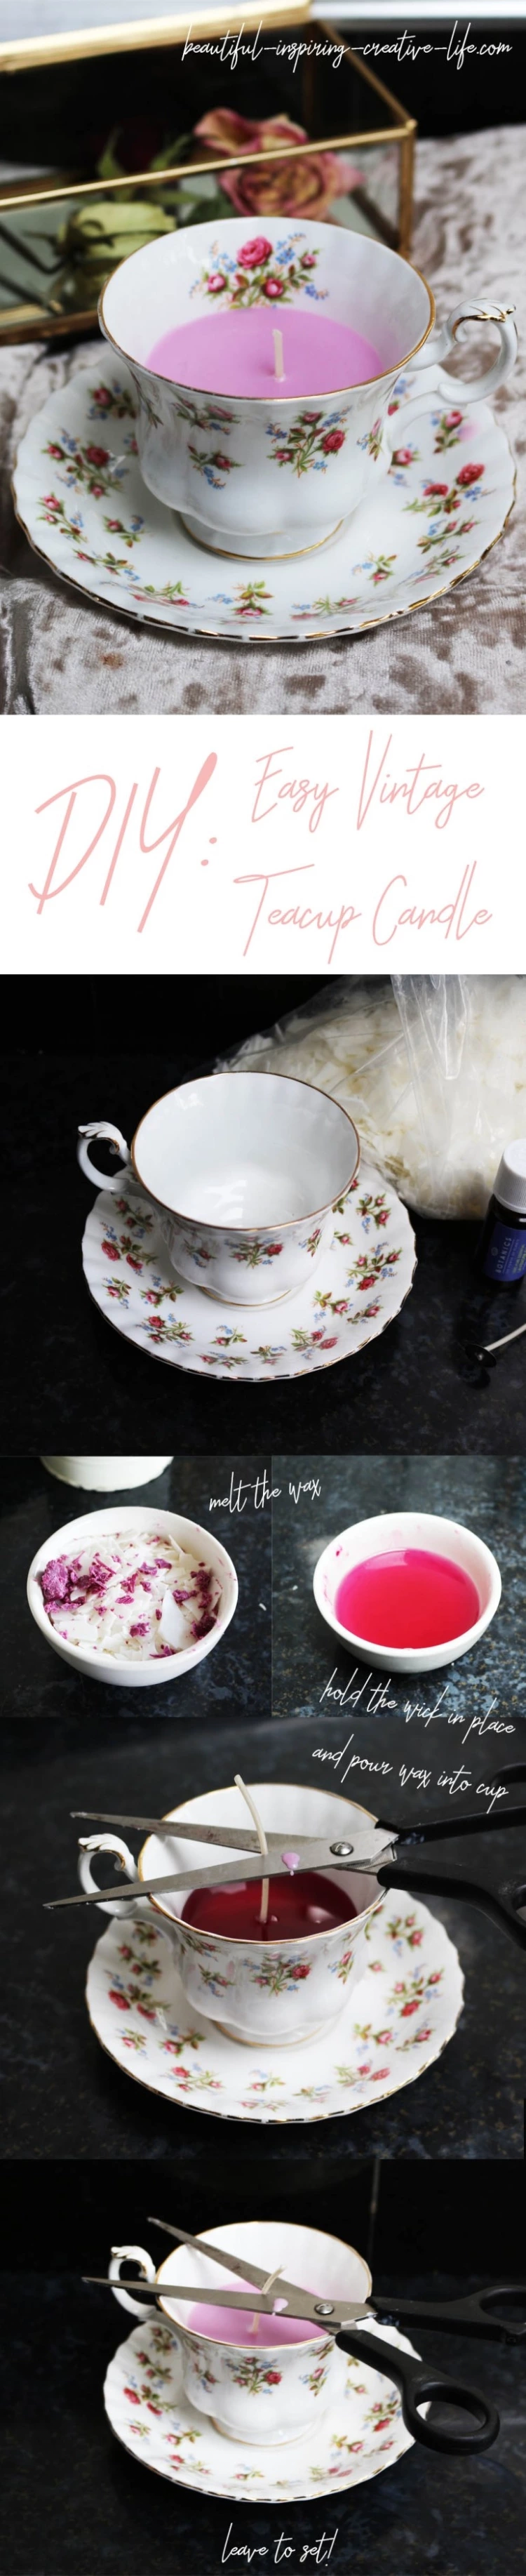 Easy, Cheap DIY Vintage Tea-Cup Candle! I Love This DIY, It's A Super Cheap Gift - It's Beautiful (and Vintage, Which I Love) 